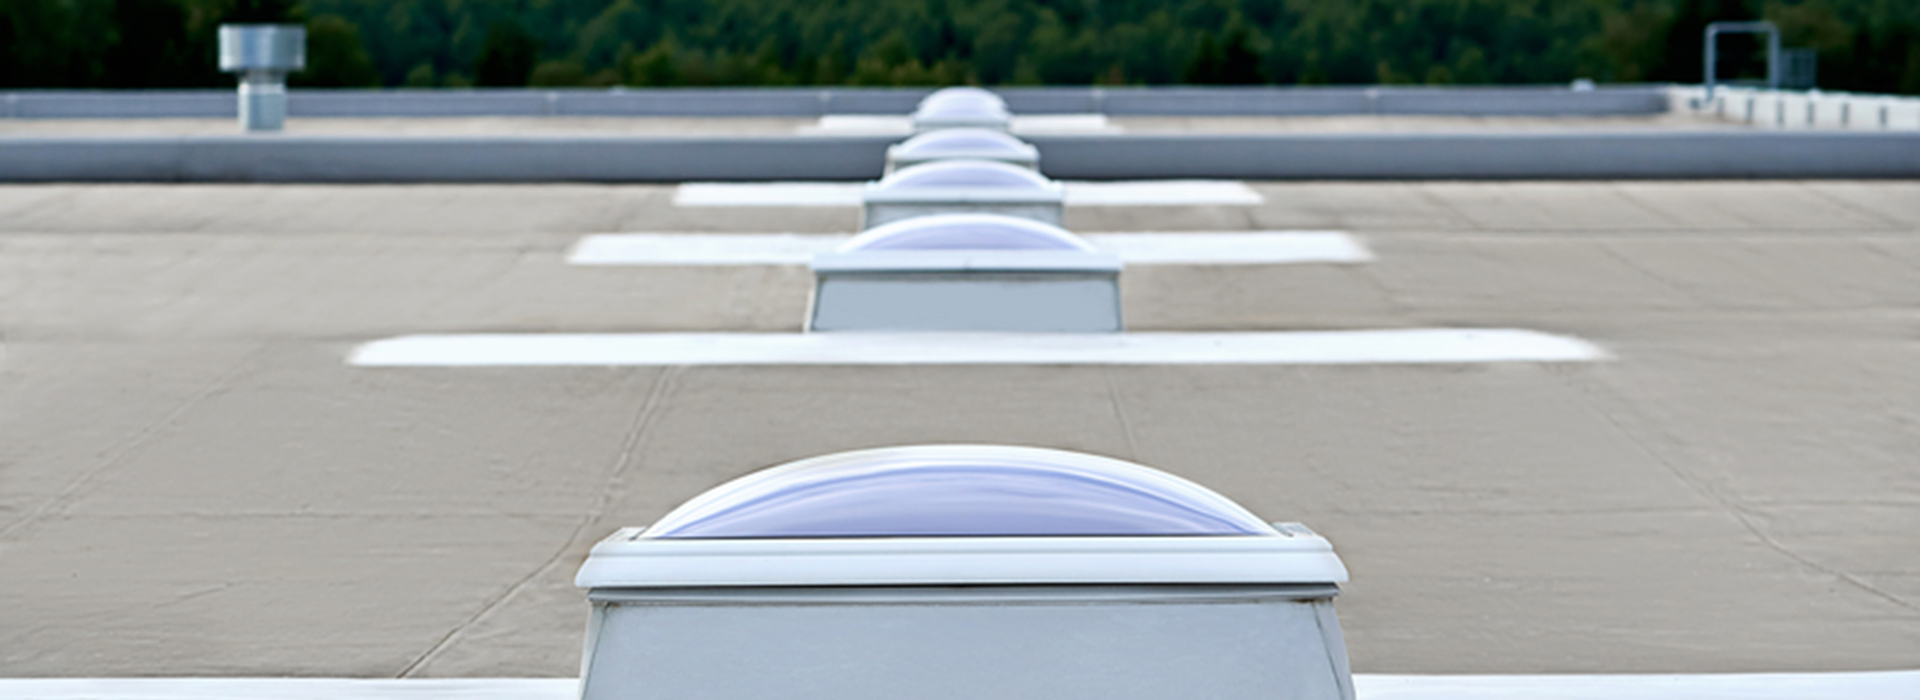 rooflight domes on a roof in a line